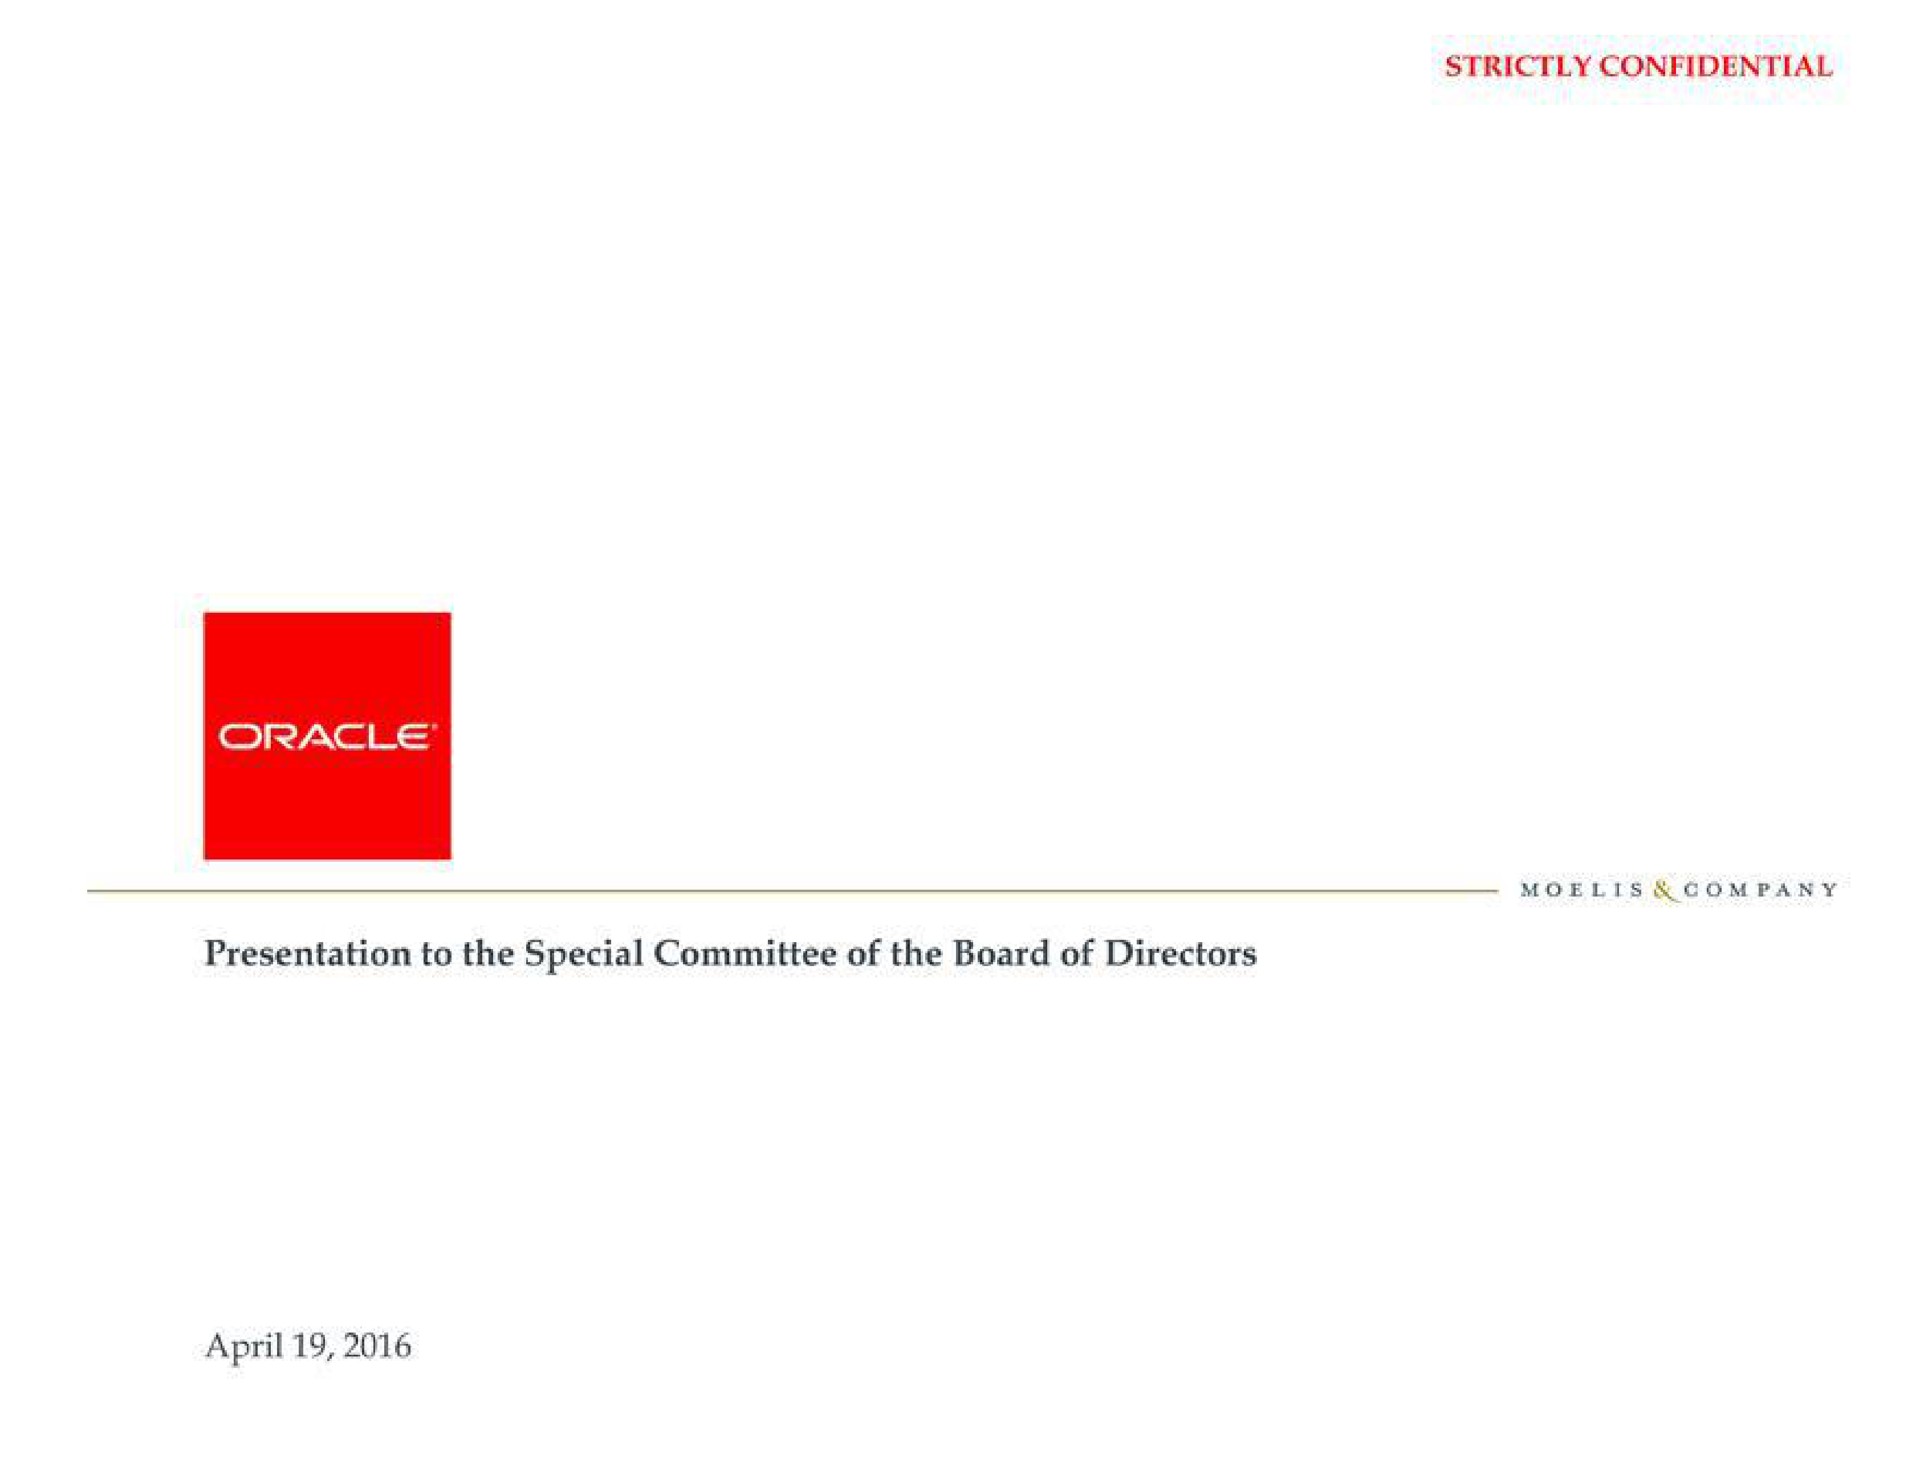 oracle presentation to the special committee of the board of directors | Moelis & Company